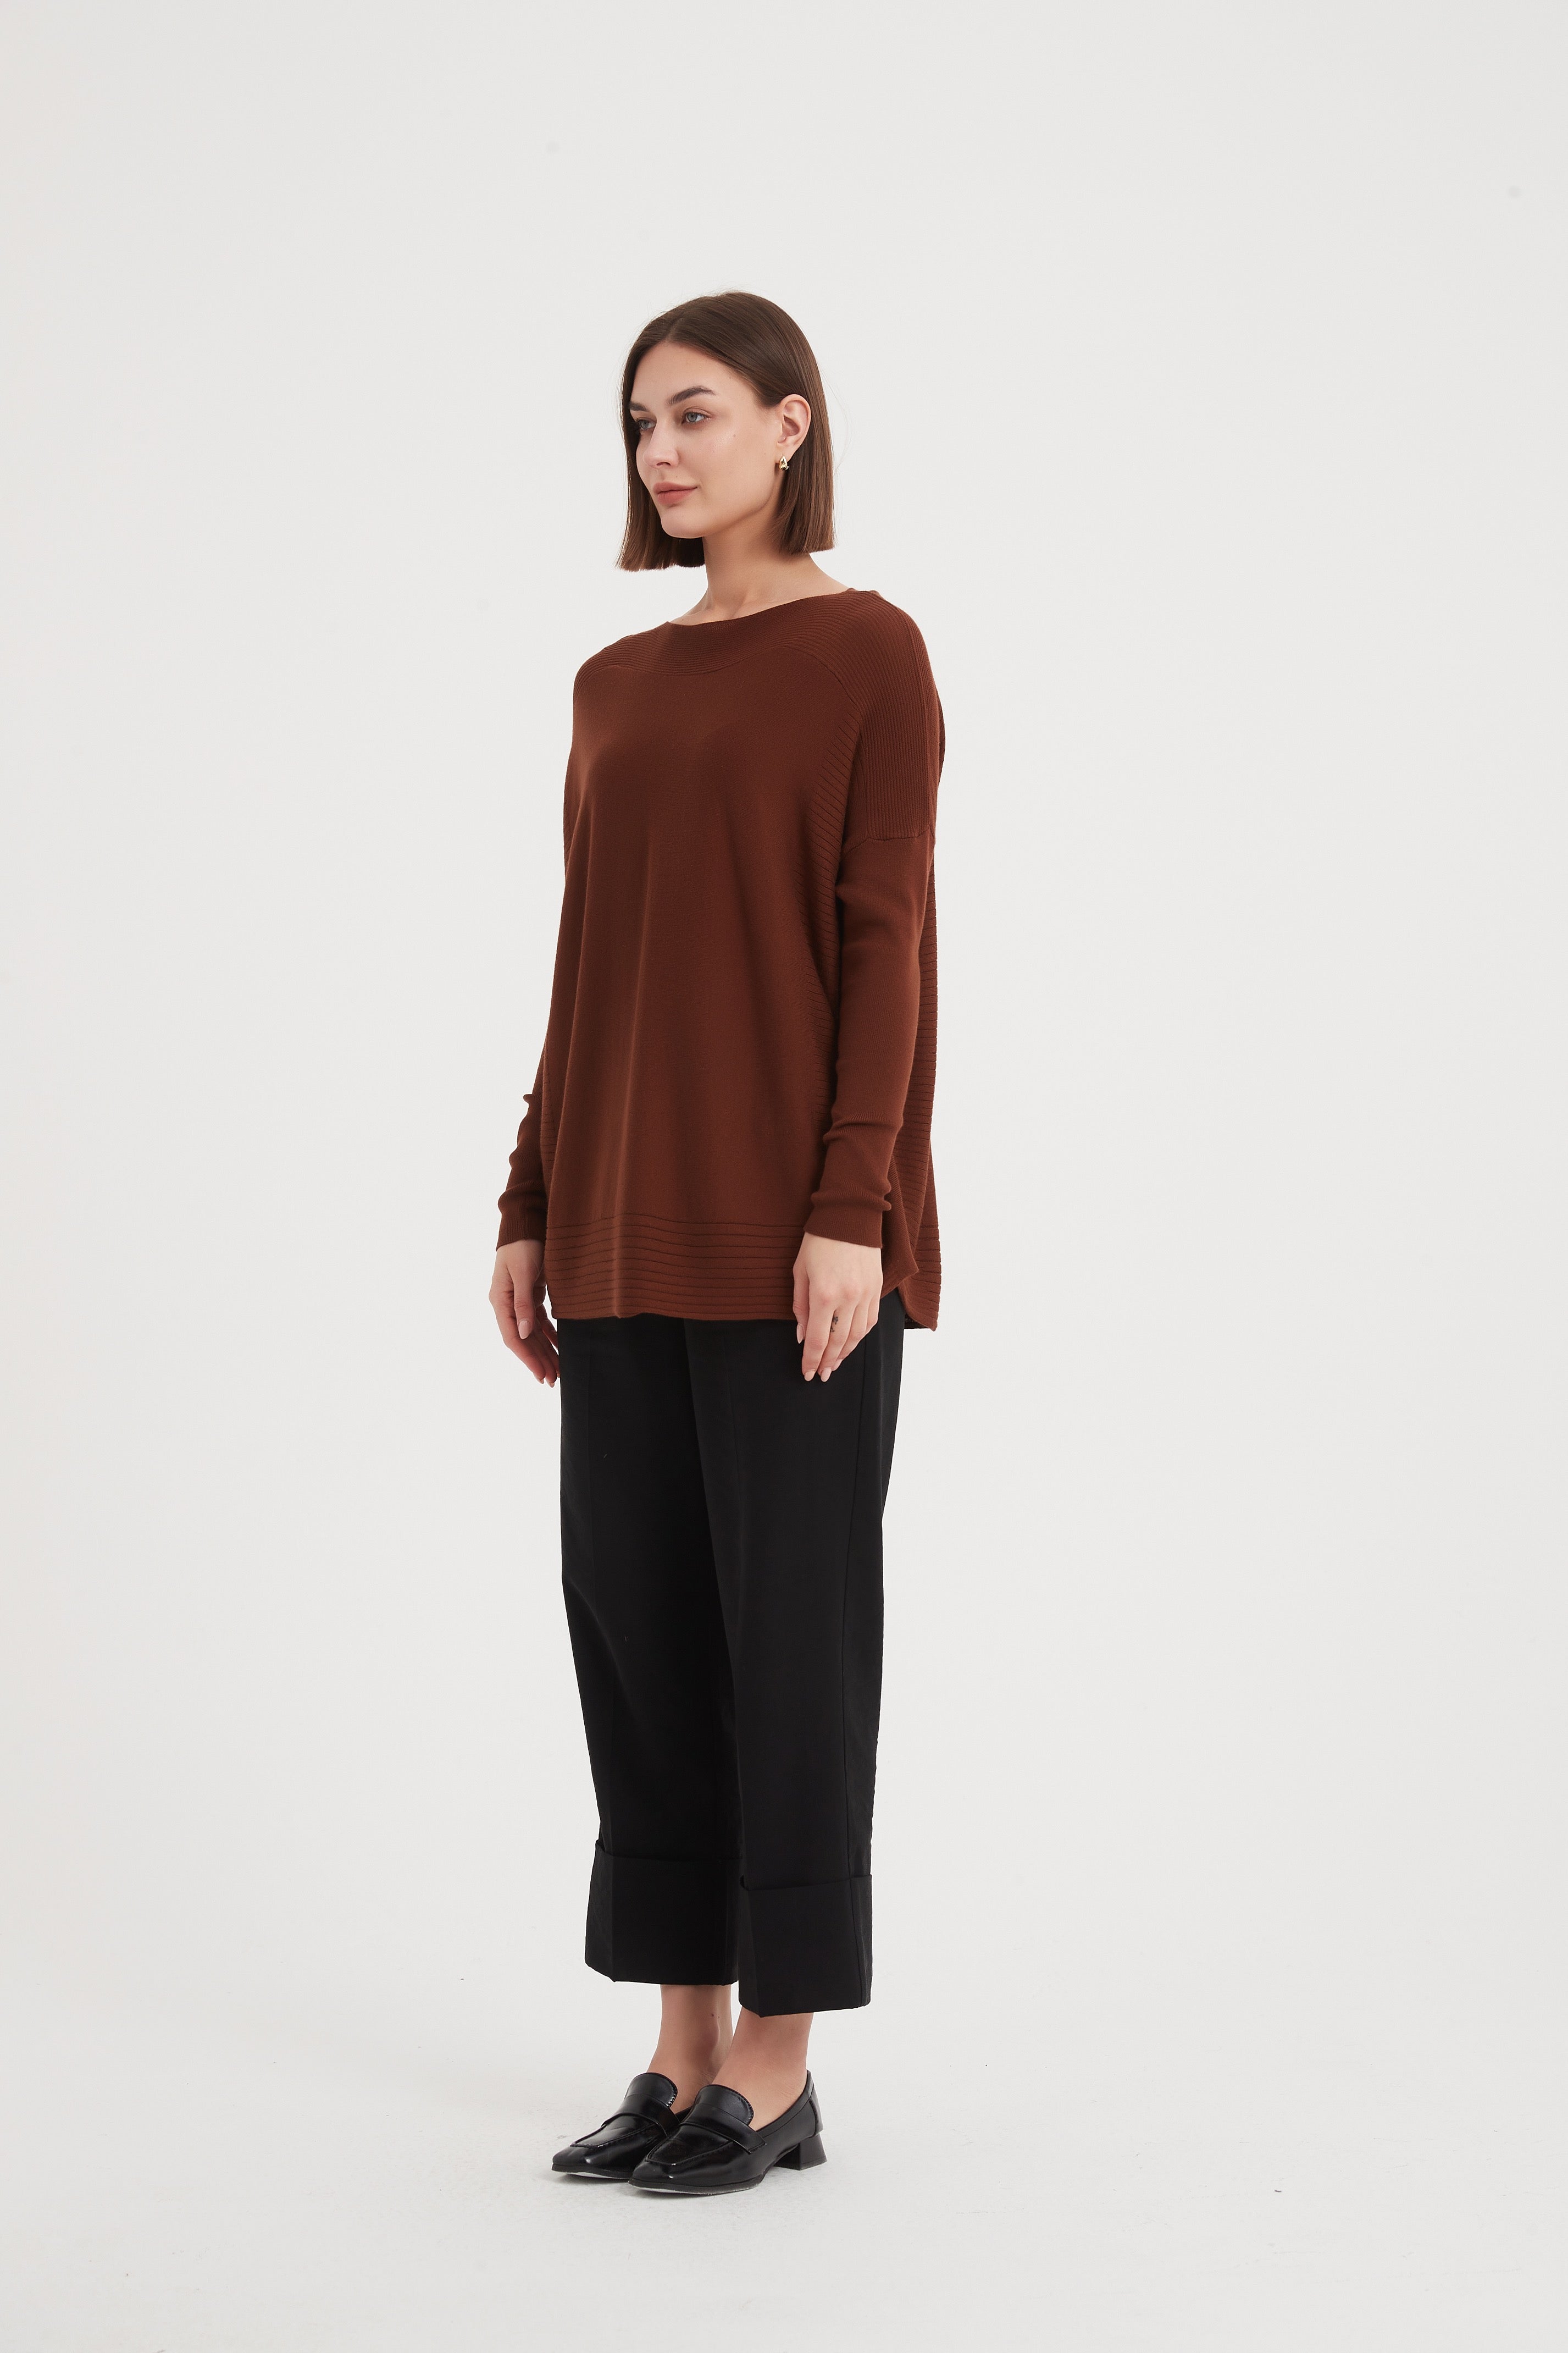 Wide Neck Knit Top